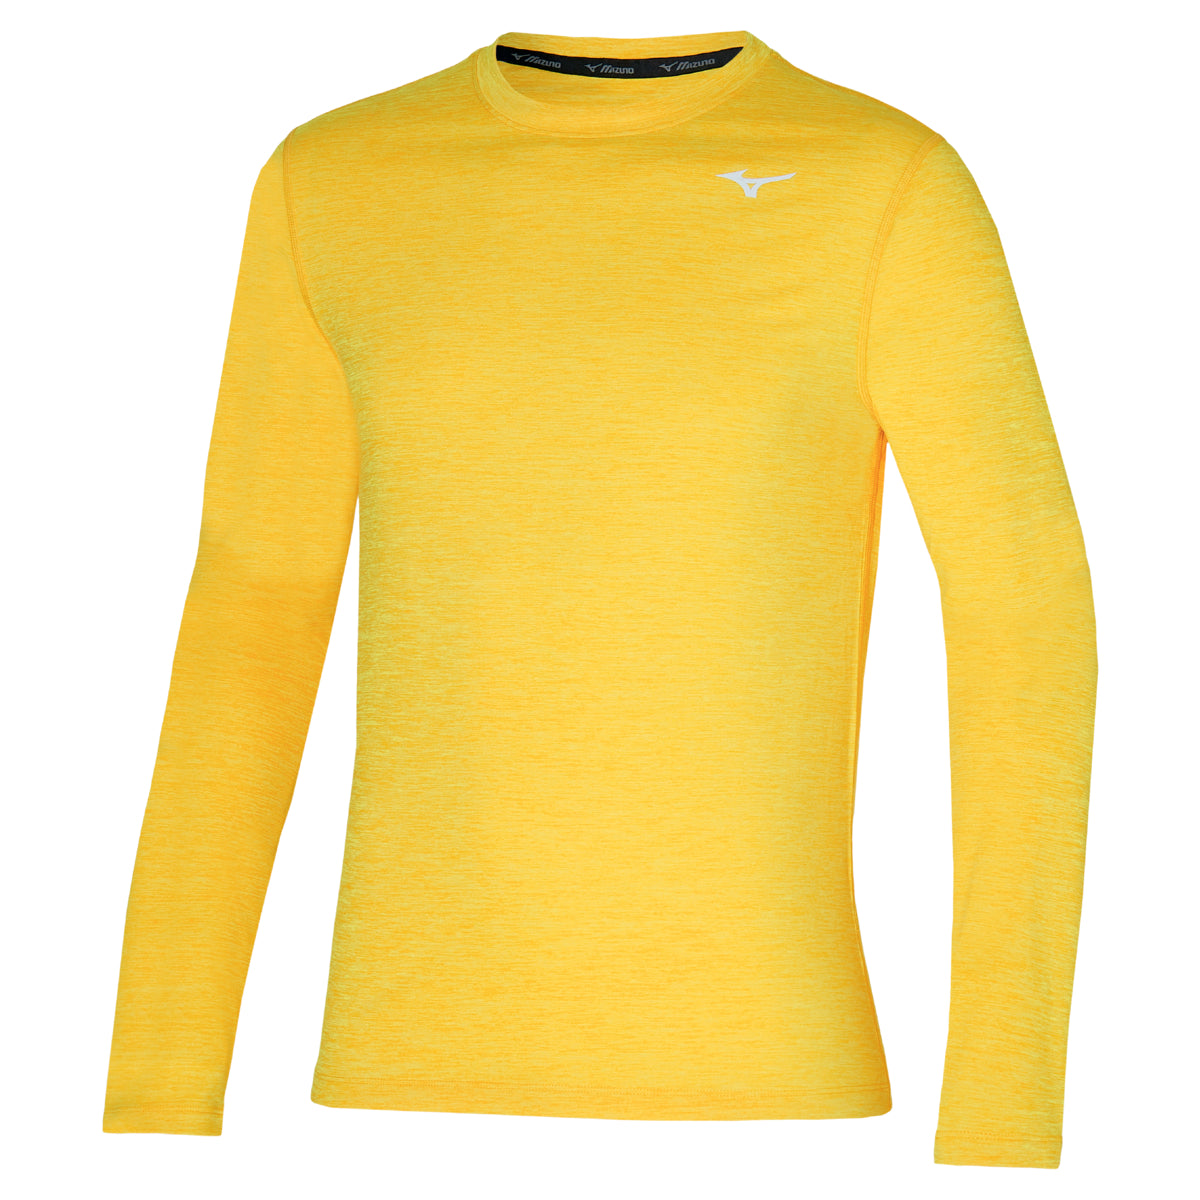 Shop Mens Long Sleeve Tees with Moti Running and save 10% on